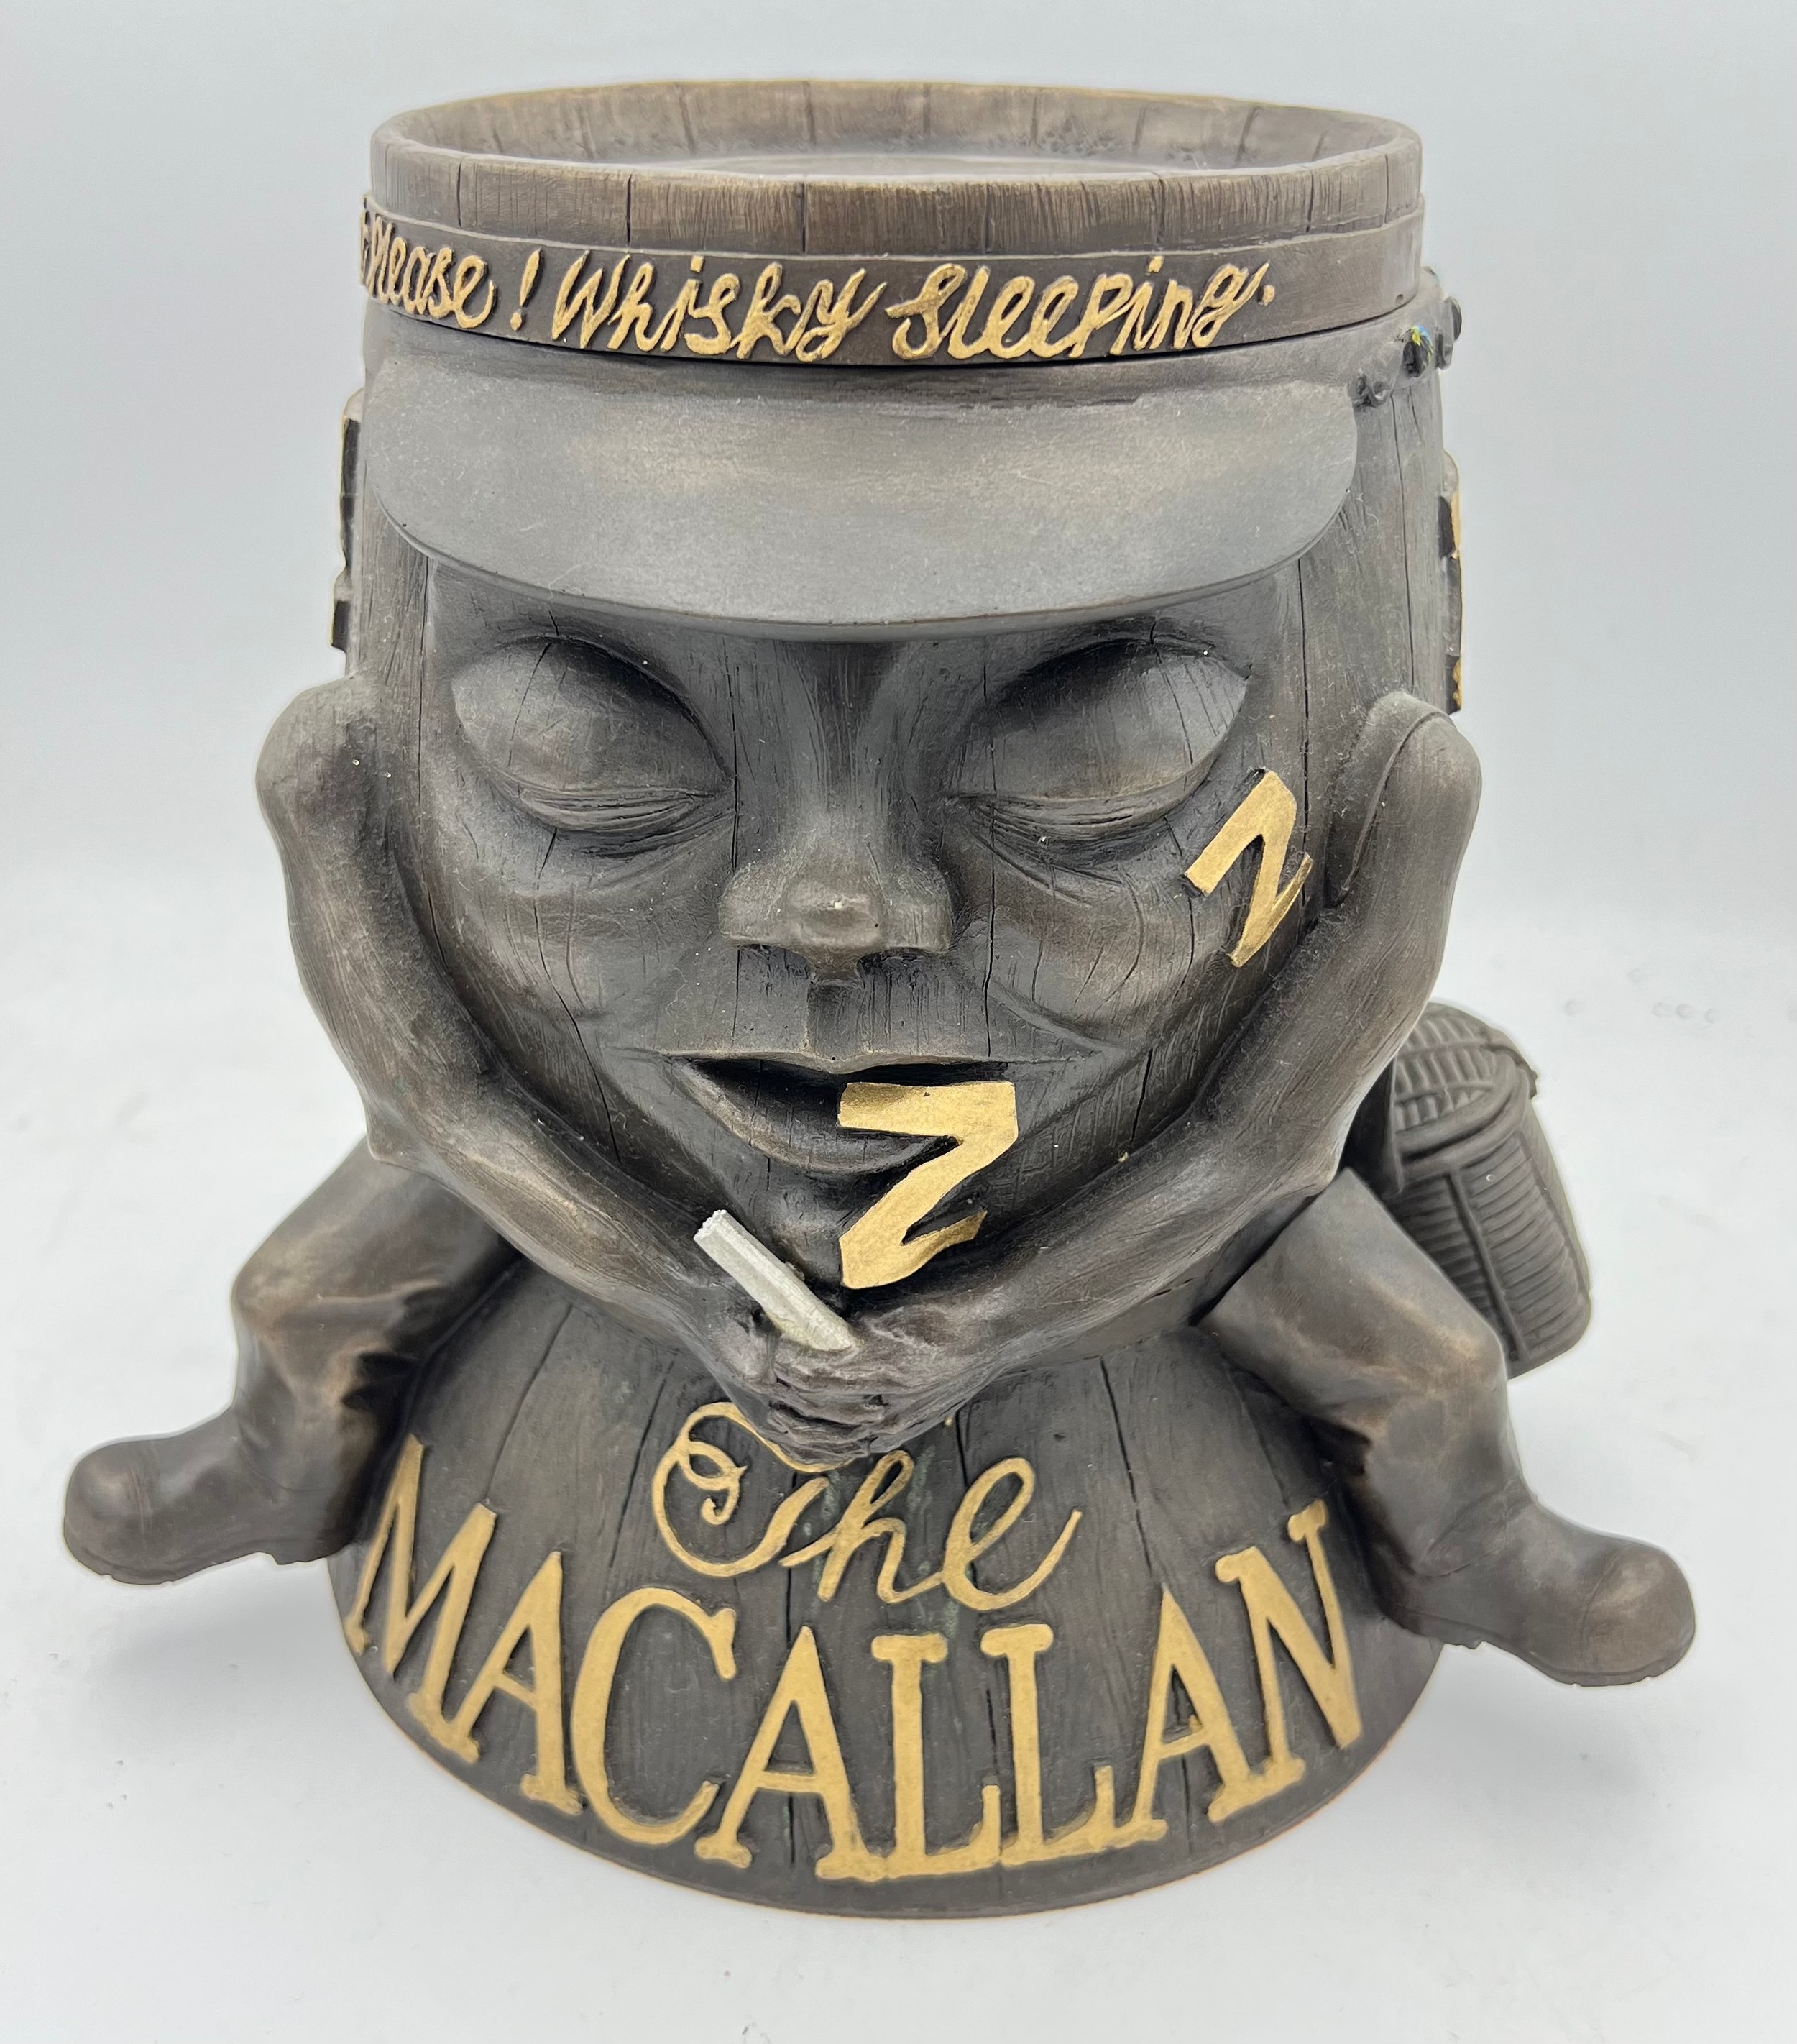 The Macallan sleeping barrel ice bucket, fishing themed advertising piece, item is embossed with “